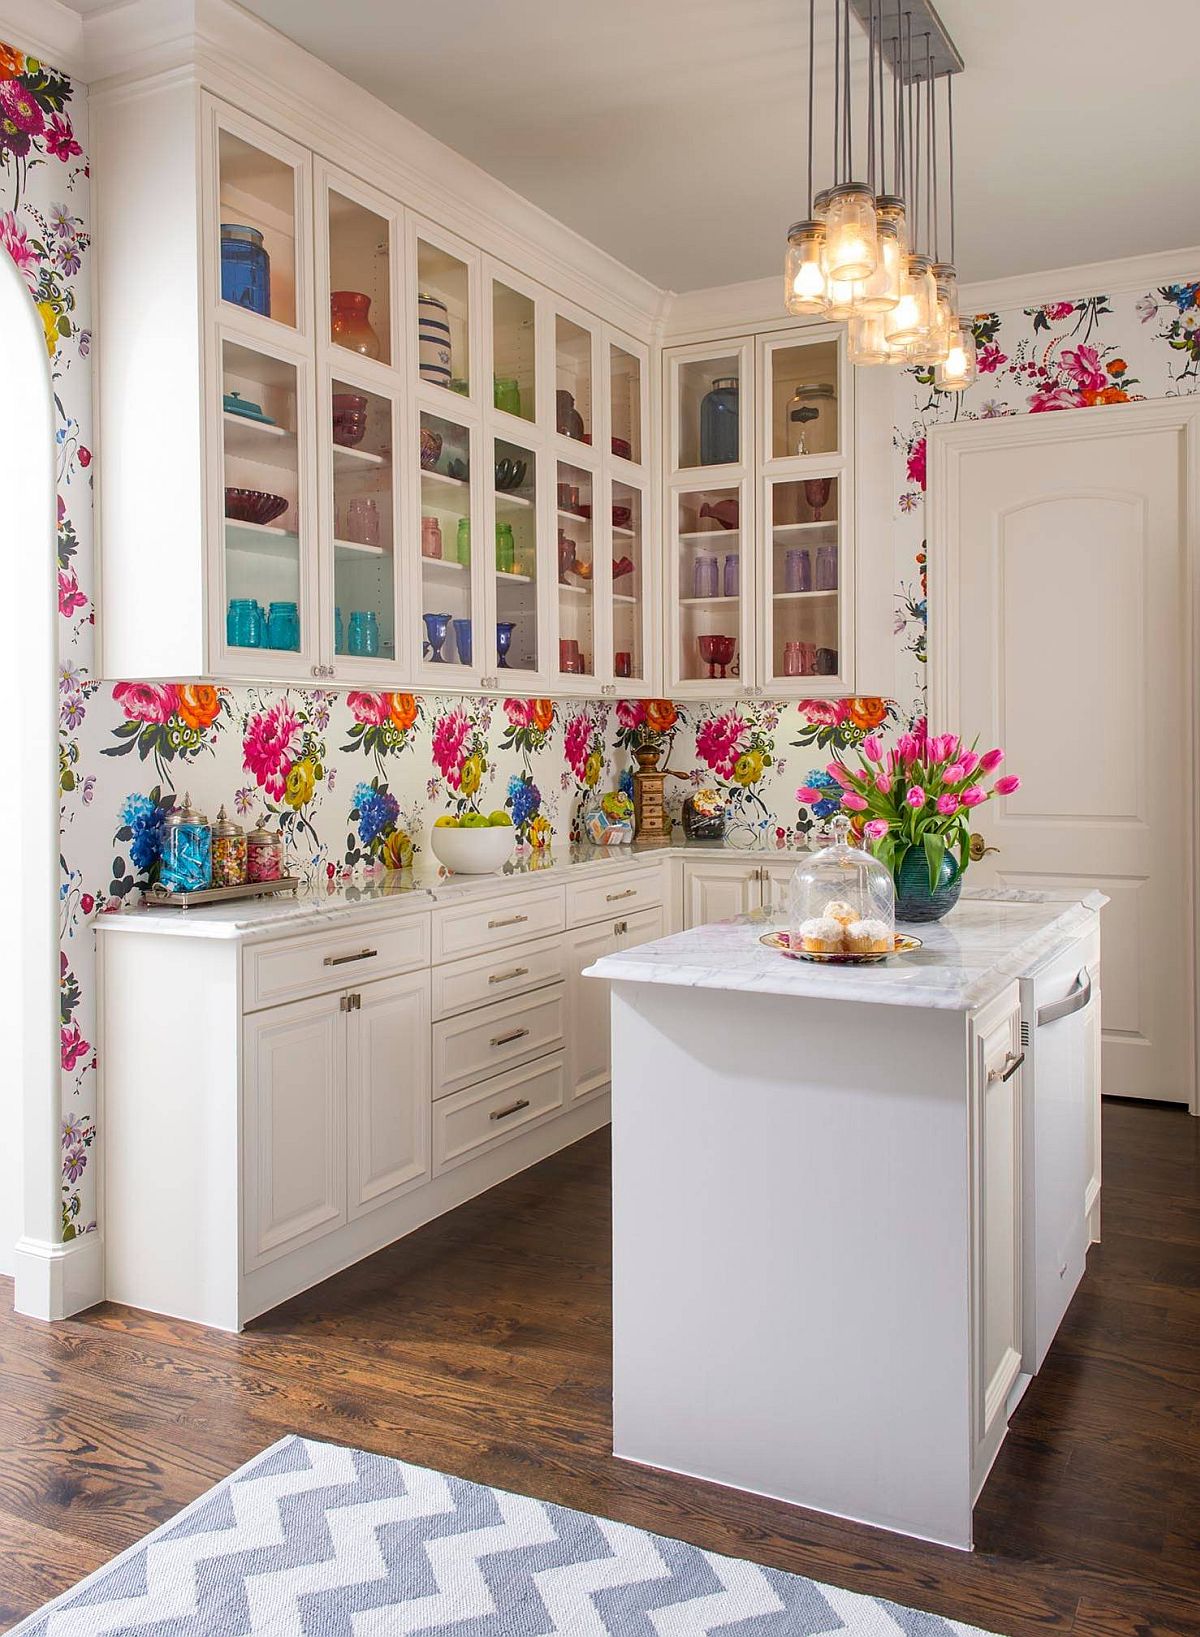 Small-kitchen-where-colorful-flowers-take-over-with-class-69030